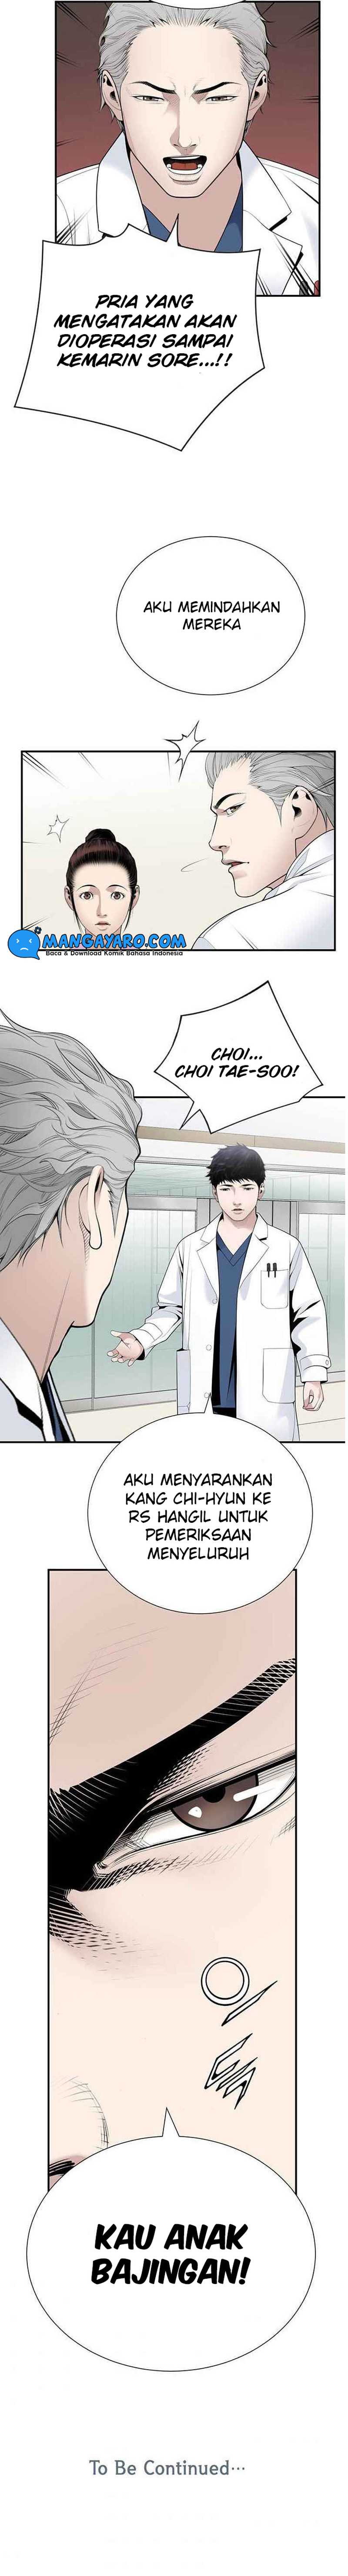 Dr. Choi Tae-Soo Chapter 26